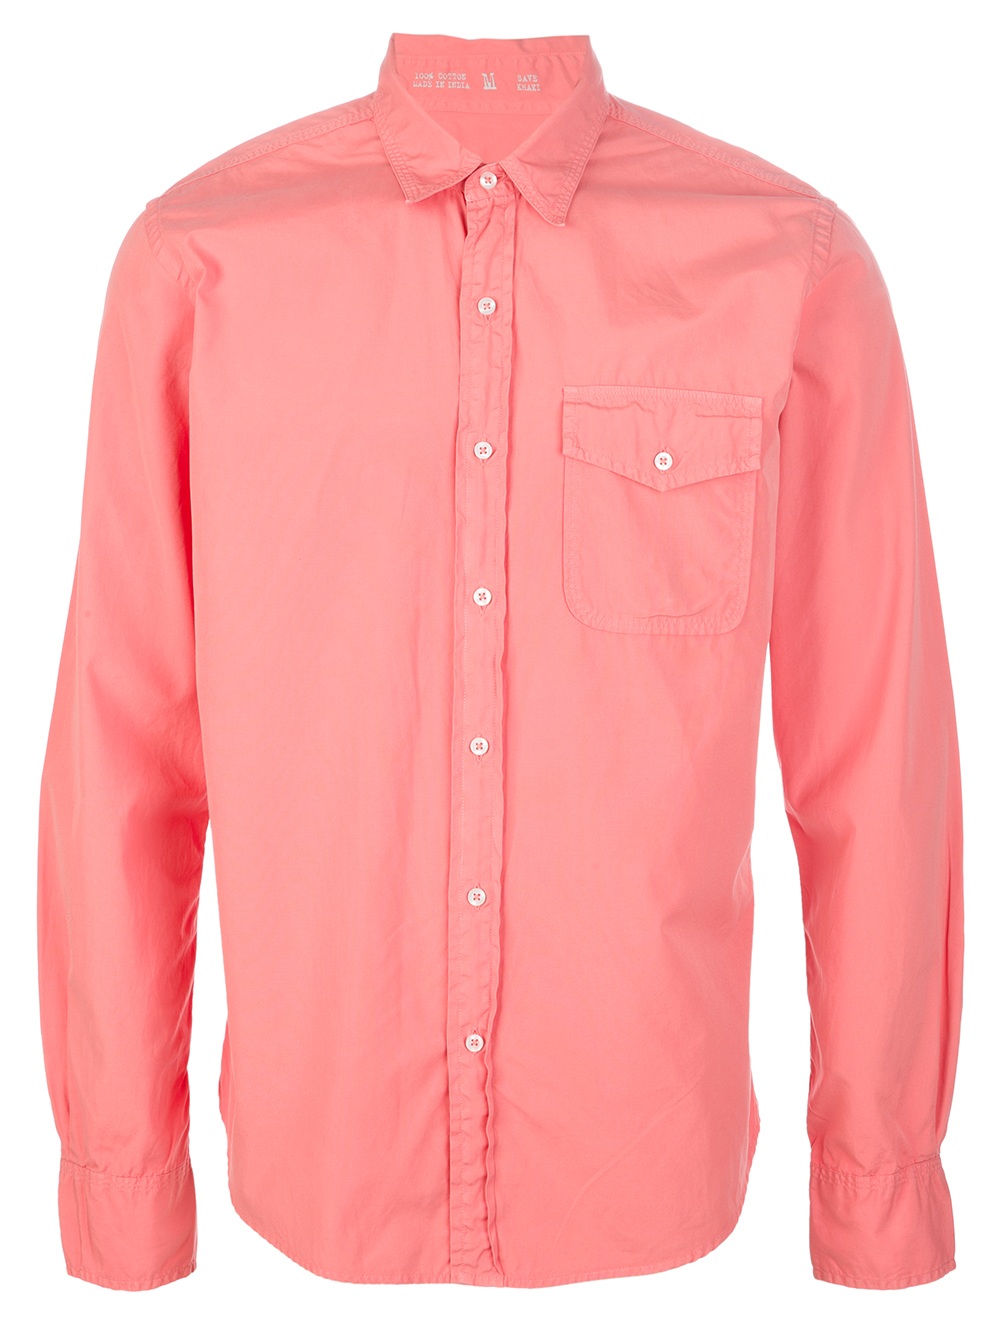 Save Khaki Button Down Shirt in Pink for Men - Lyst